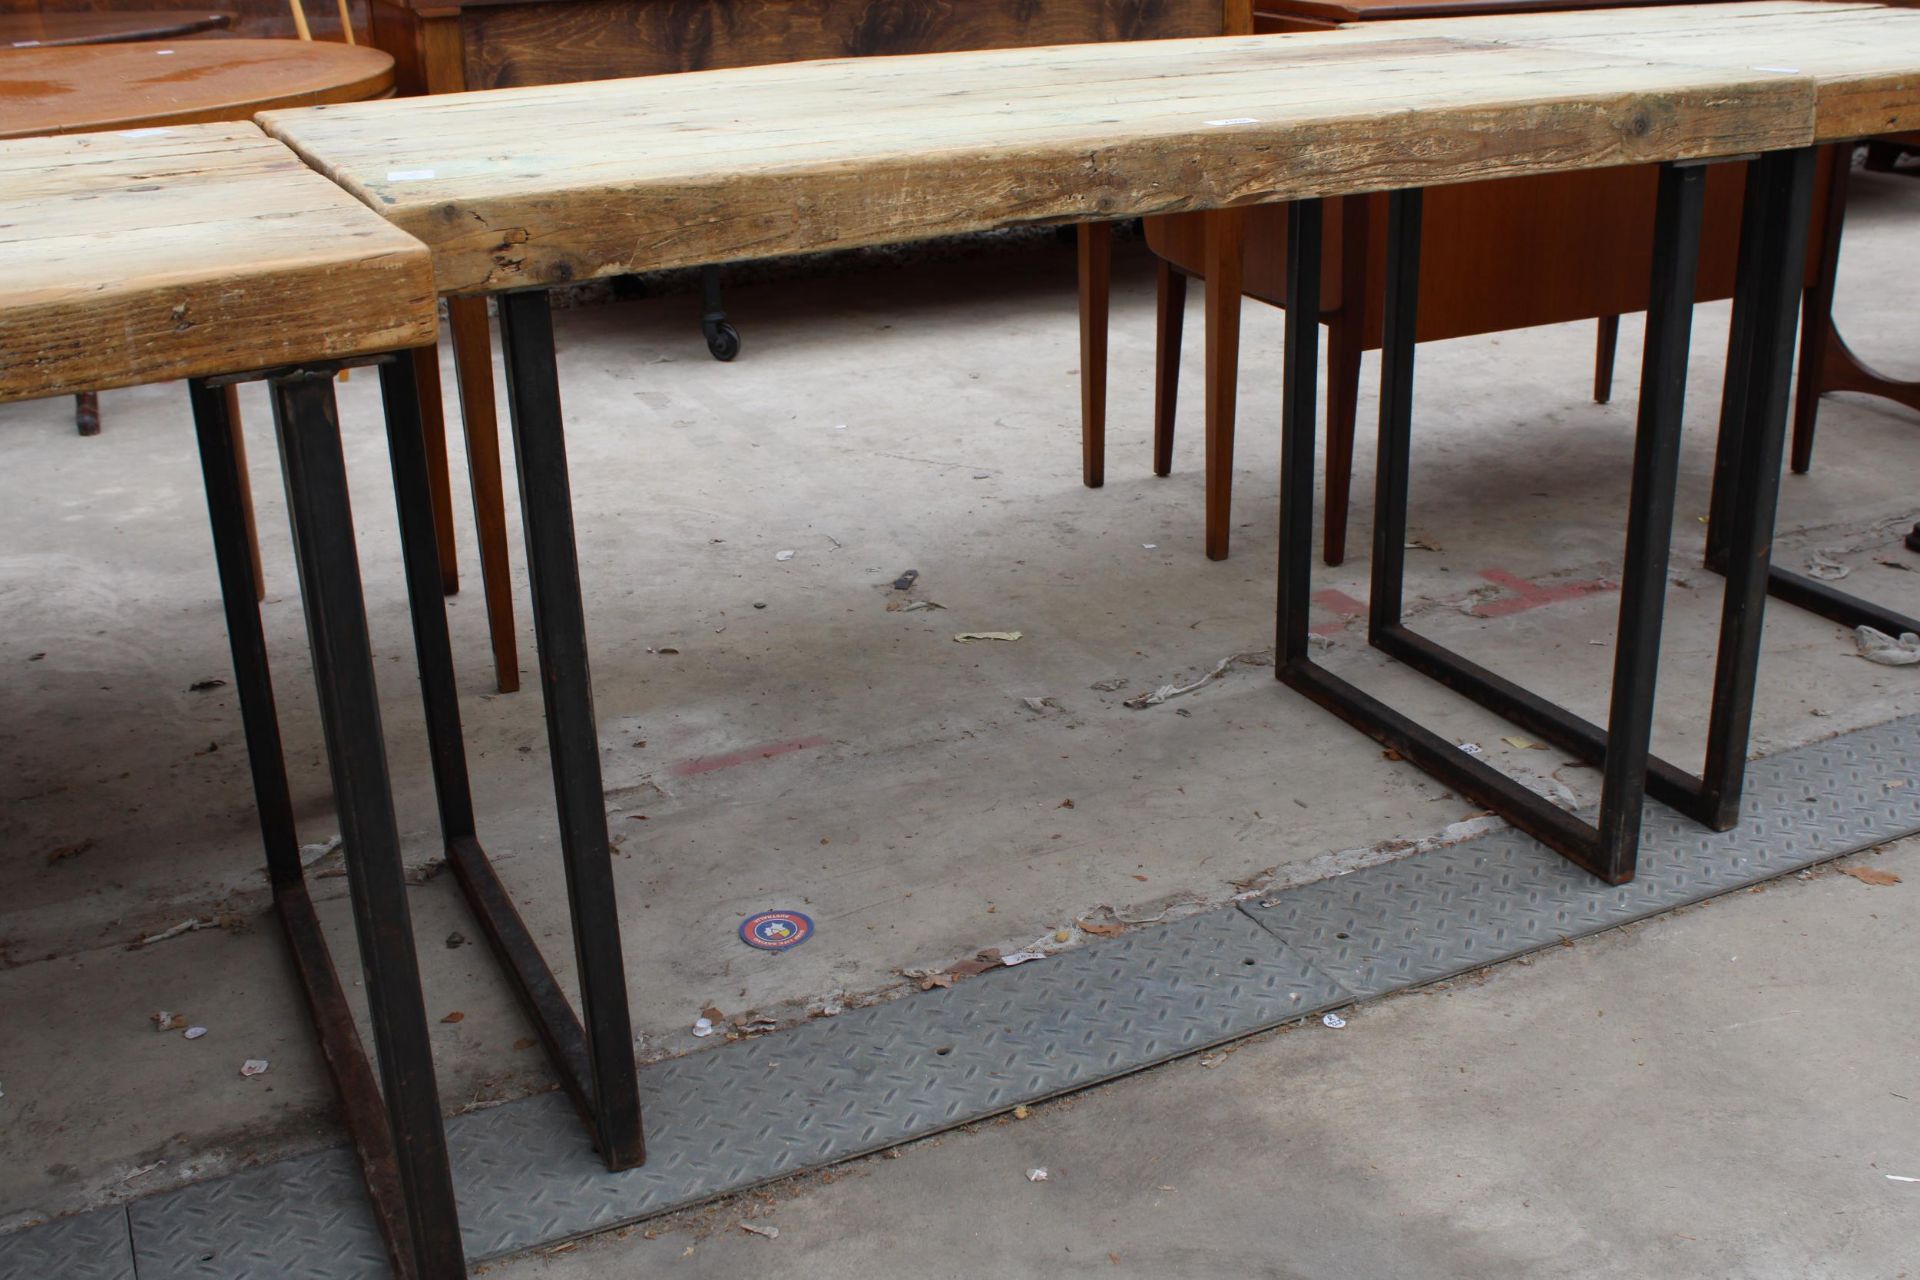 A RUSTIC FOUR PLANK TABLE, 47" X 27" ON METAL LEGS - Image 2 of 2